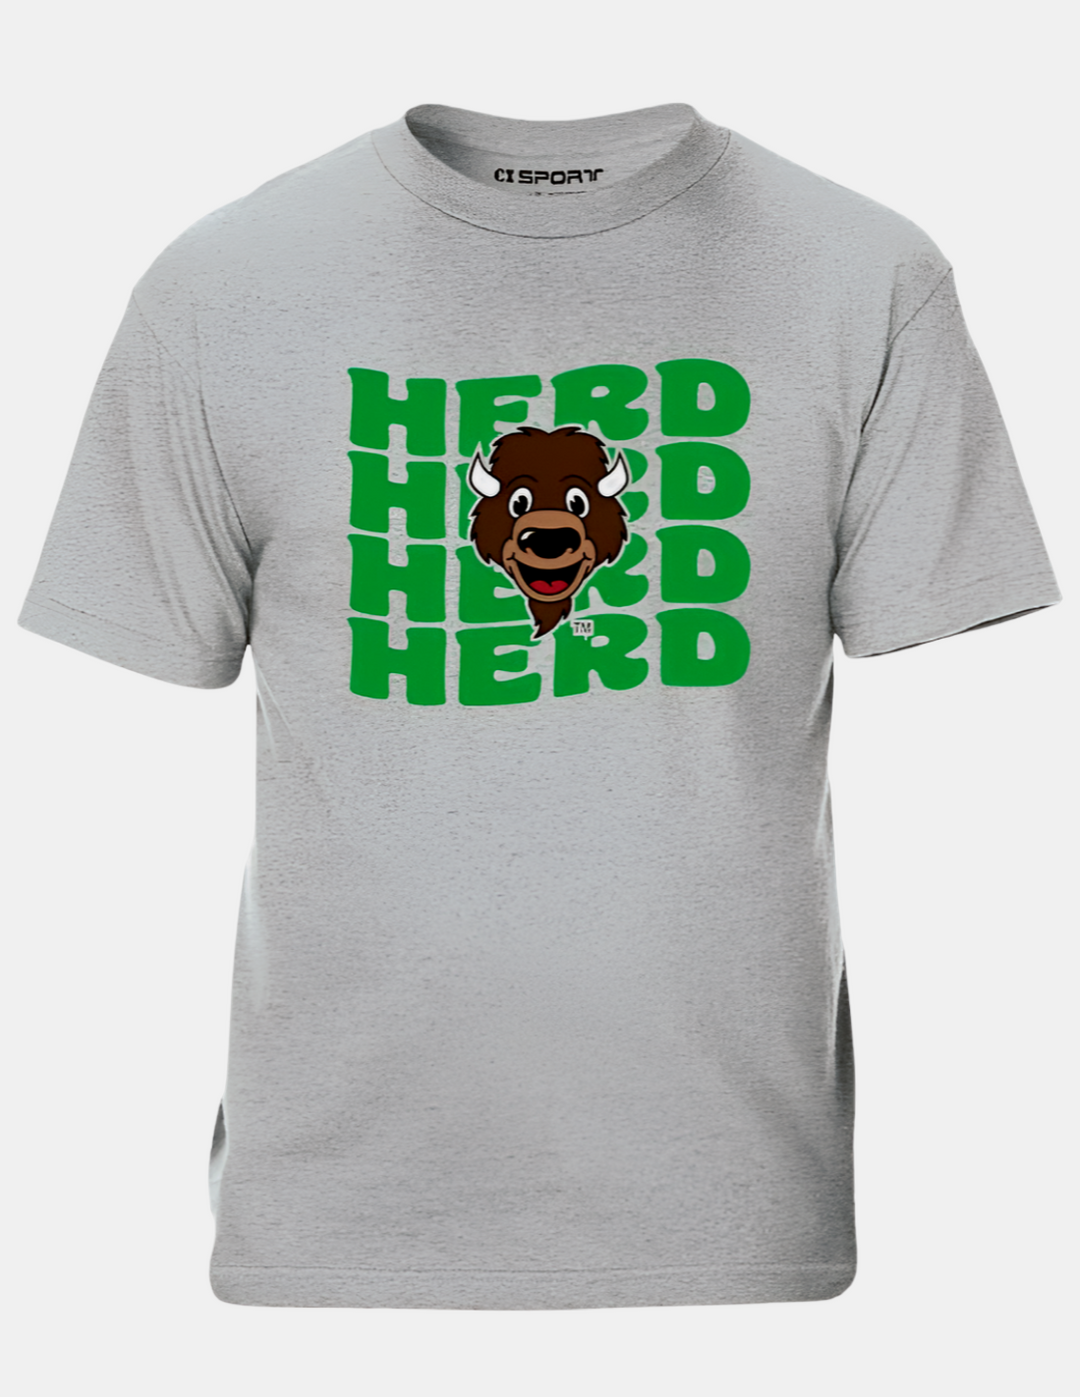 a light grey tee shirt with repeating word HERD on the front centered with a baby marco head